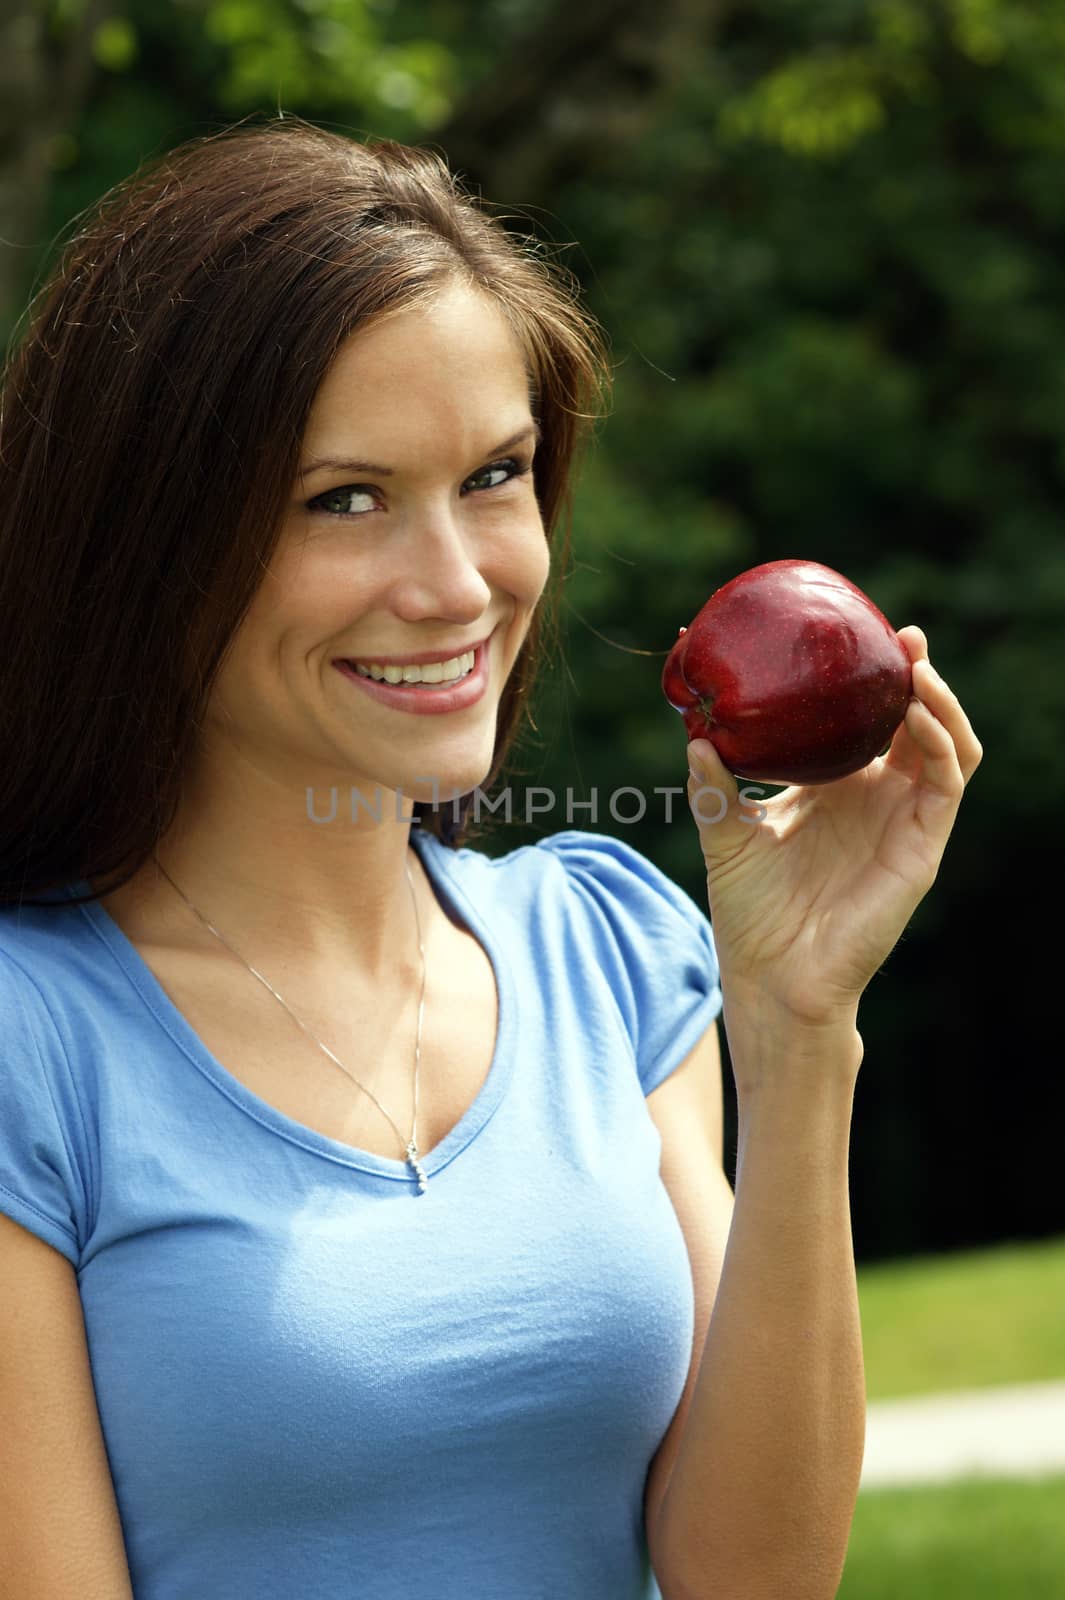 An Active and Attractive woman in the park with an Apple